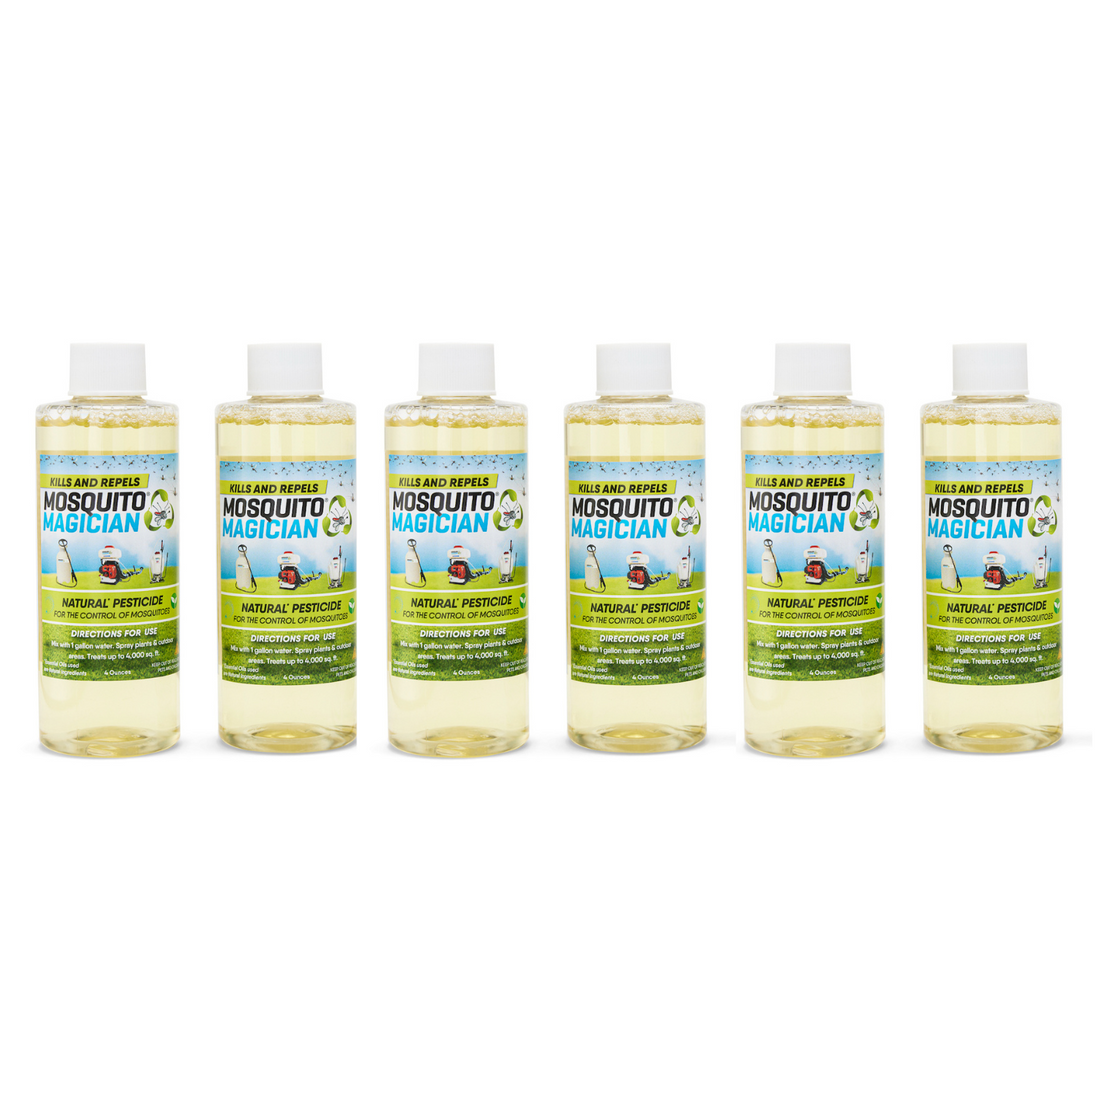 Mosquito Killer &amp; Repellent Concentrate - Easy To Use Pack! 4 ounce bottles (6)